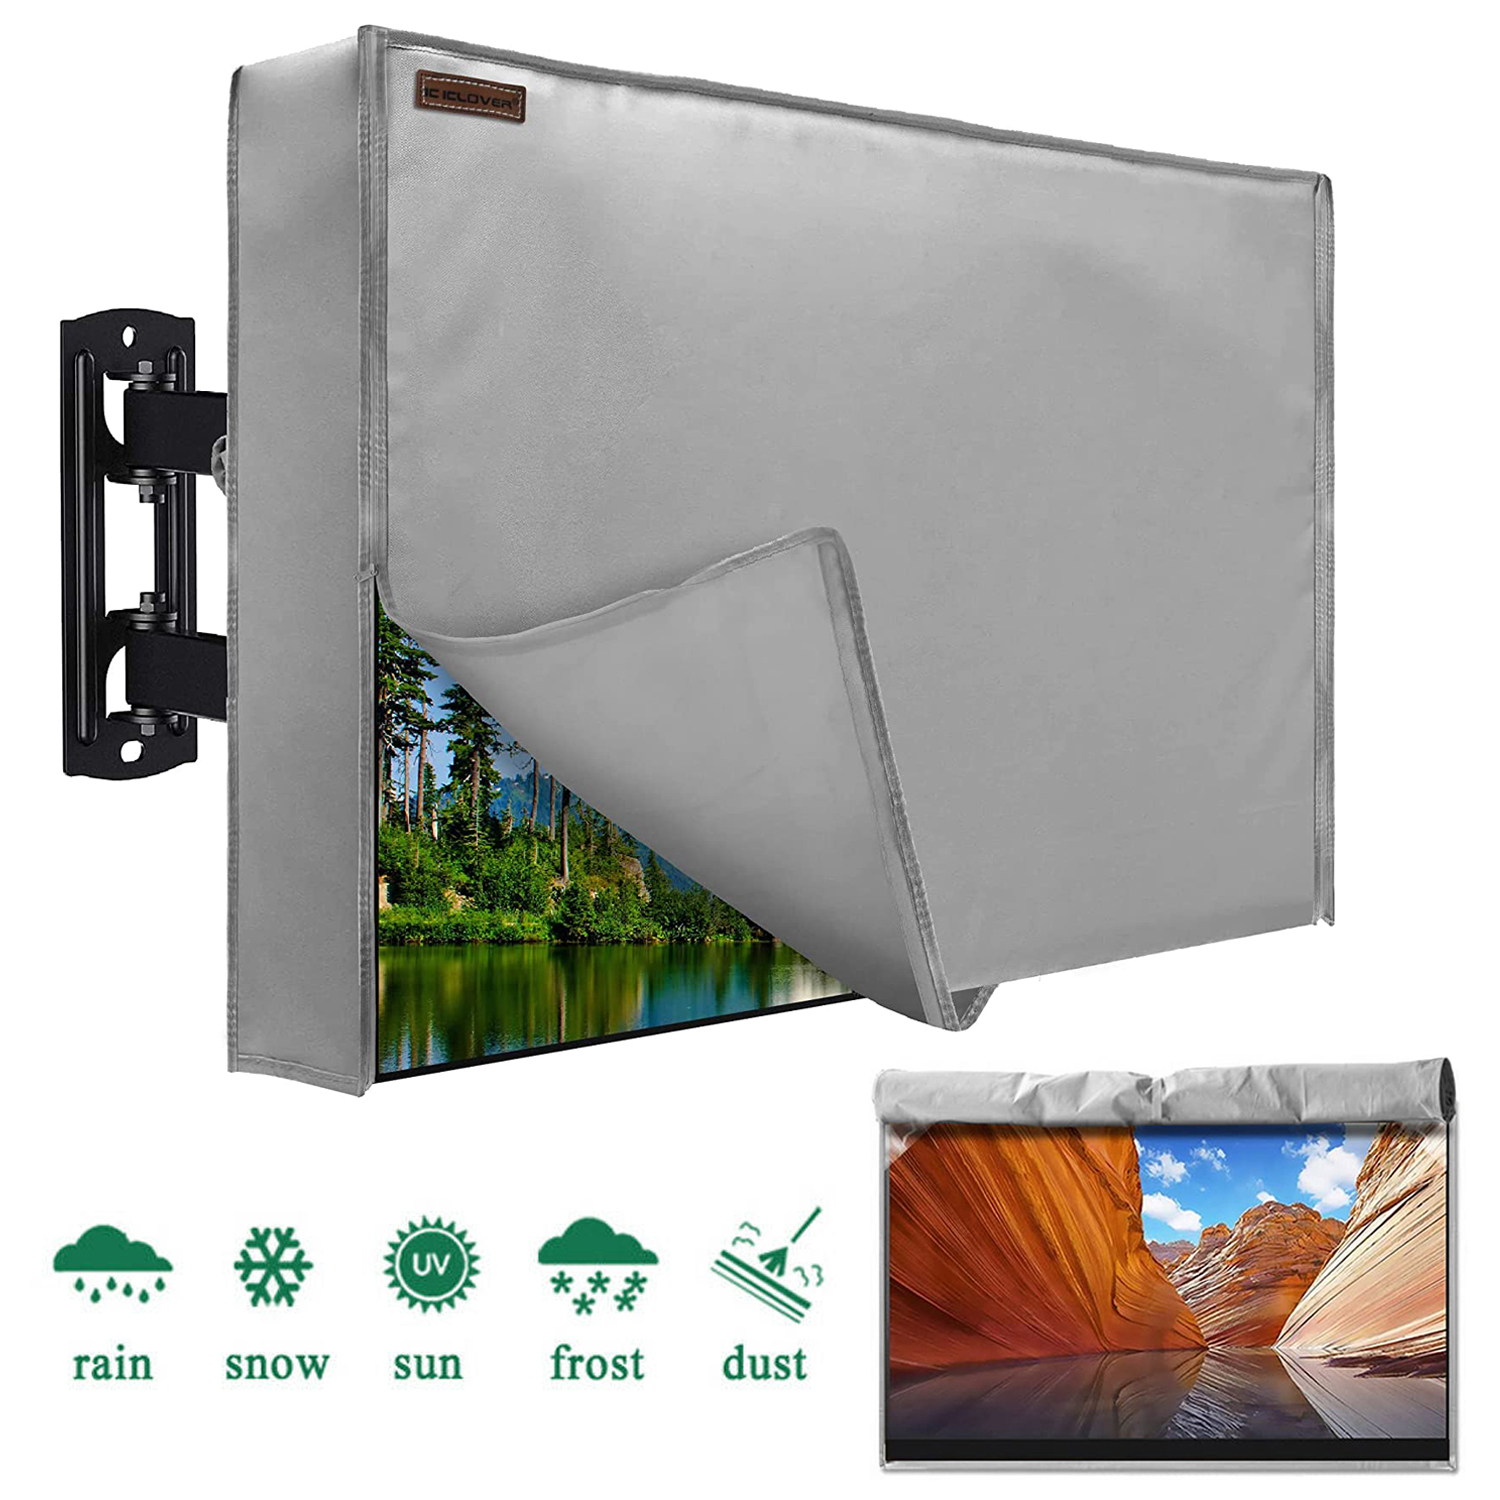 IC ICLOVER 60"-65" Outdoor Weatherproof LCD Plasma TV/Television Cover Flat Screen TV/Television Dustproof Protector with Waterproof Remote Pocket, Gray - image 1 of 9